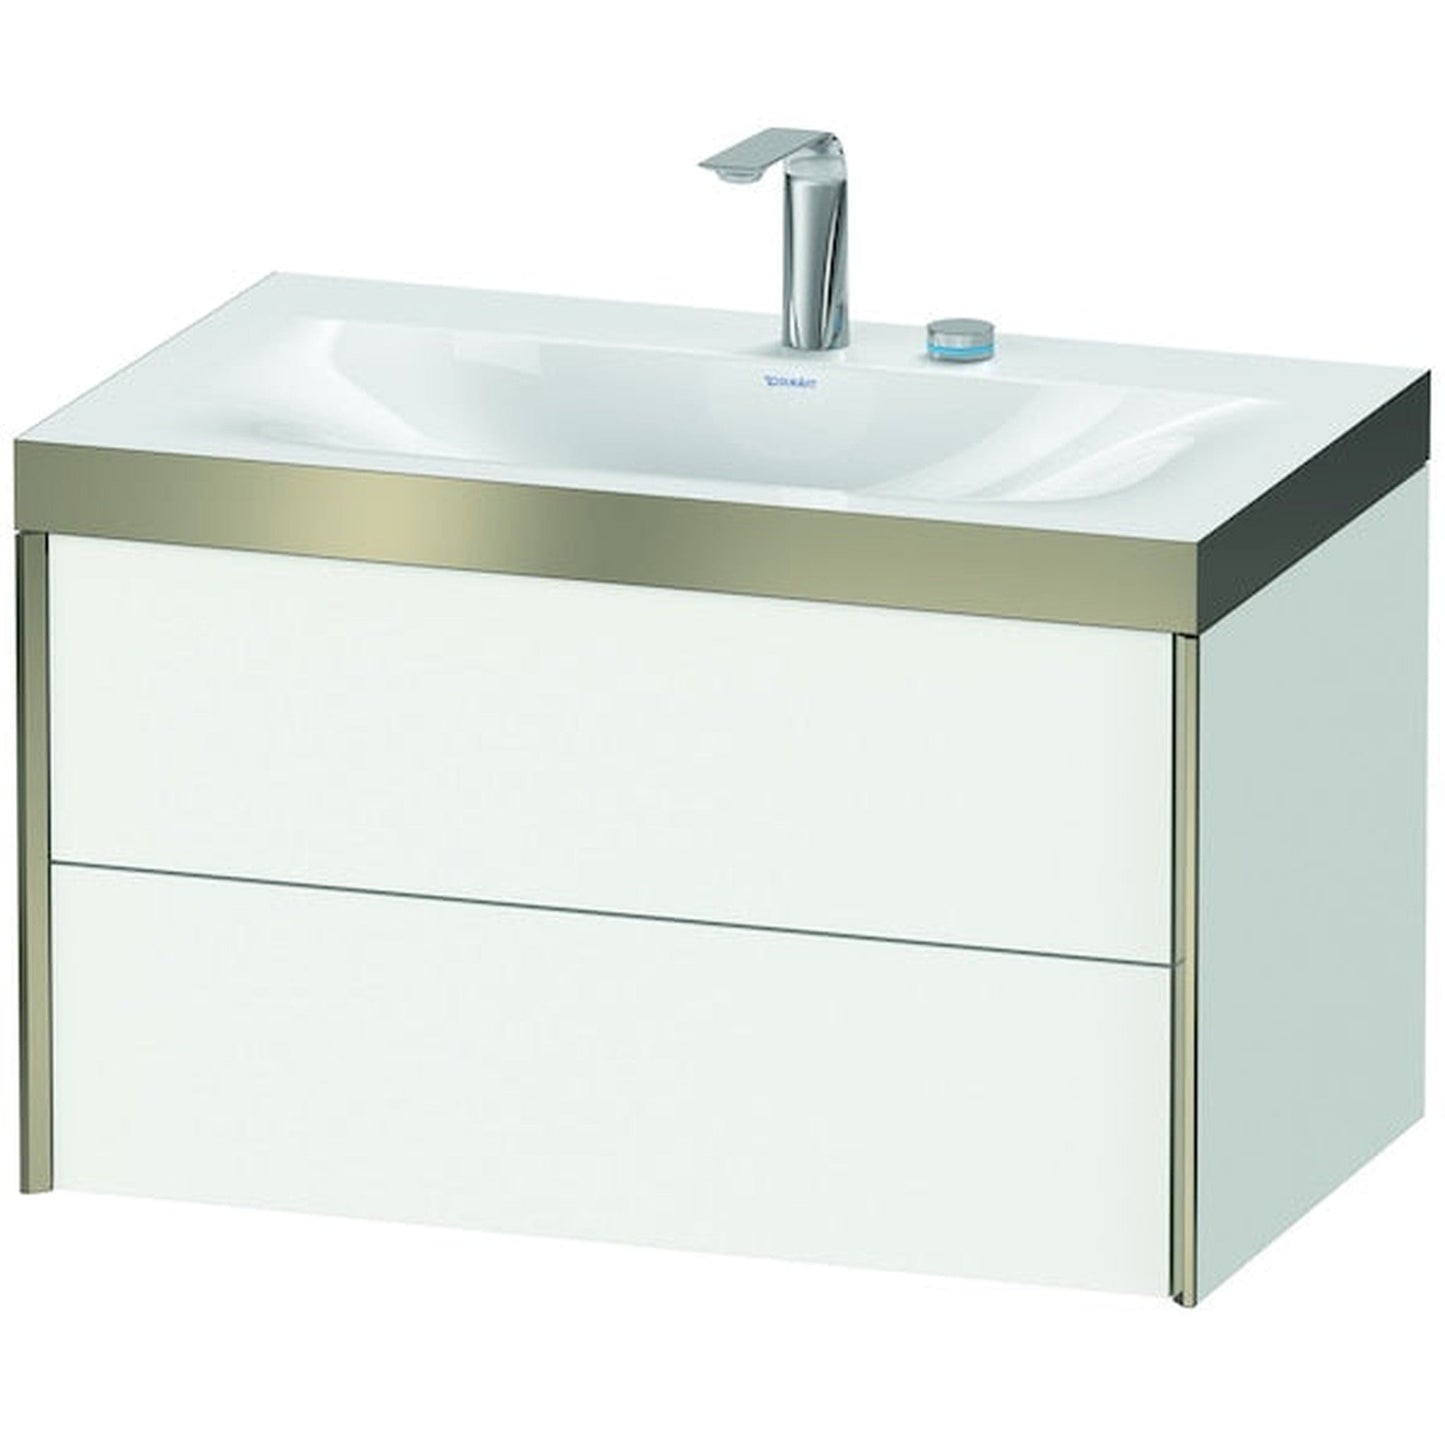 Duravit Xviu 31" x 20" x 19" Two Drawer C-Bonded Wall-Mount Vanity Kit With Two Tap Holes, White (XV4615EB118P)